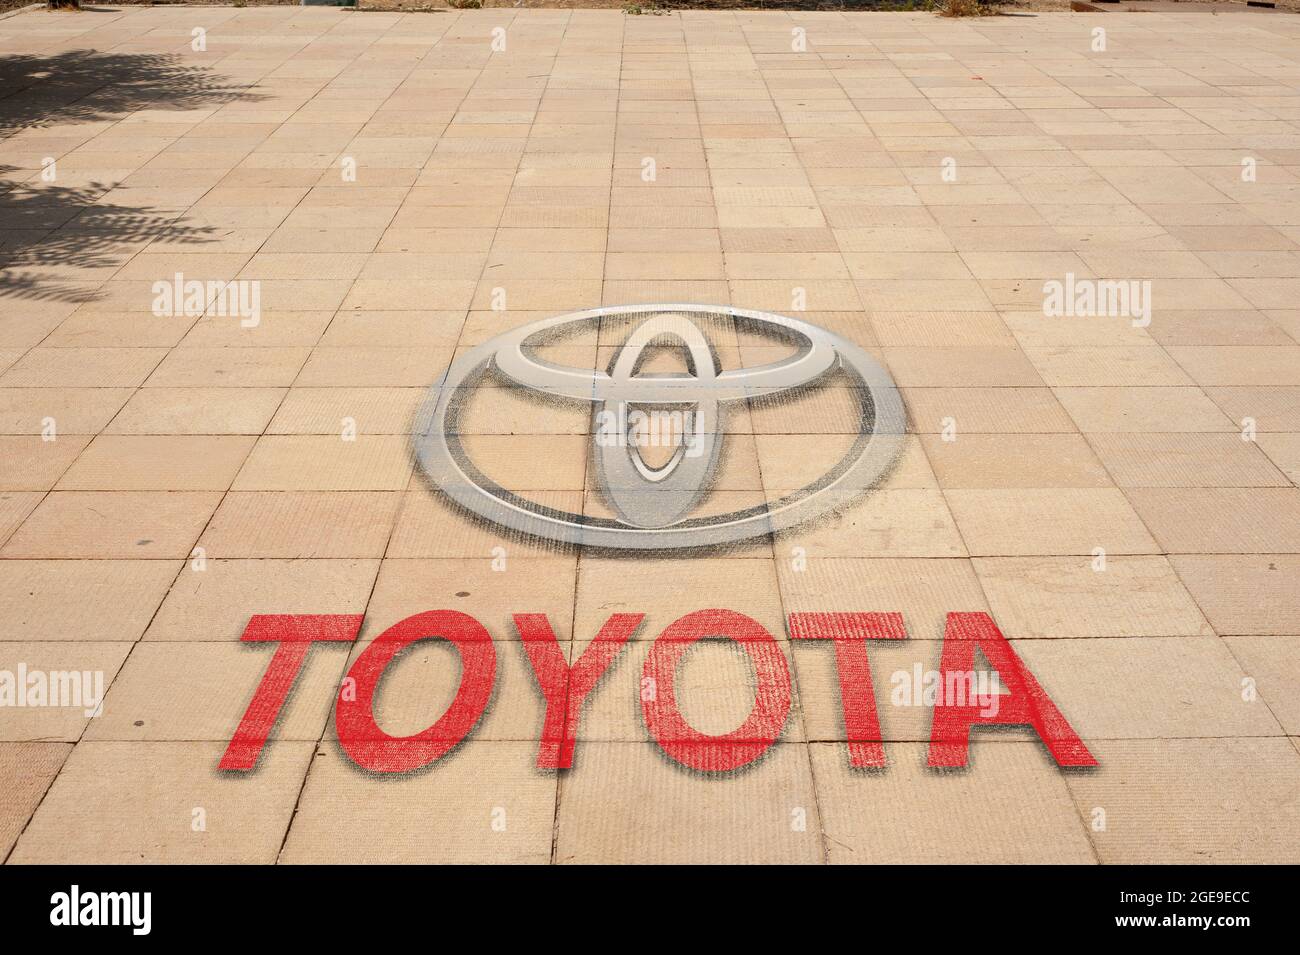 shiraz, iran - June 17, 2021: Toyota logo painted on the ground. Toyota Motor Corporation is a Japanese automotive manufacturer headquartered in Toyot Stock Photo